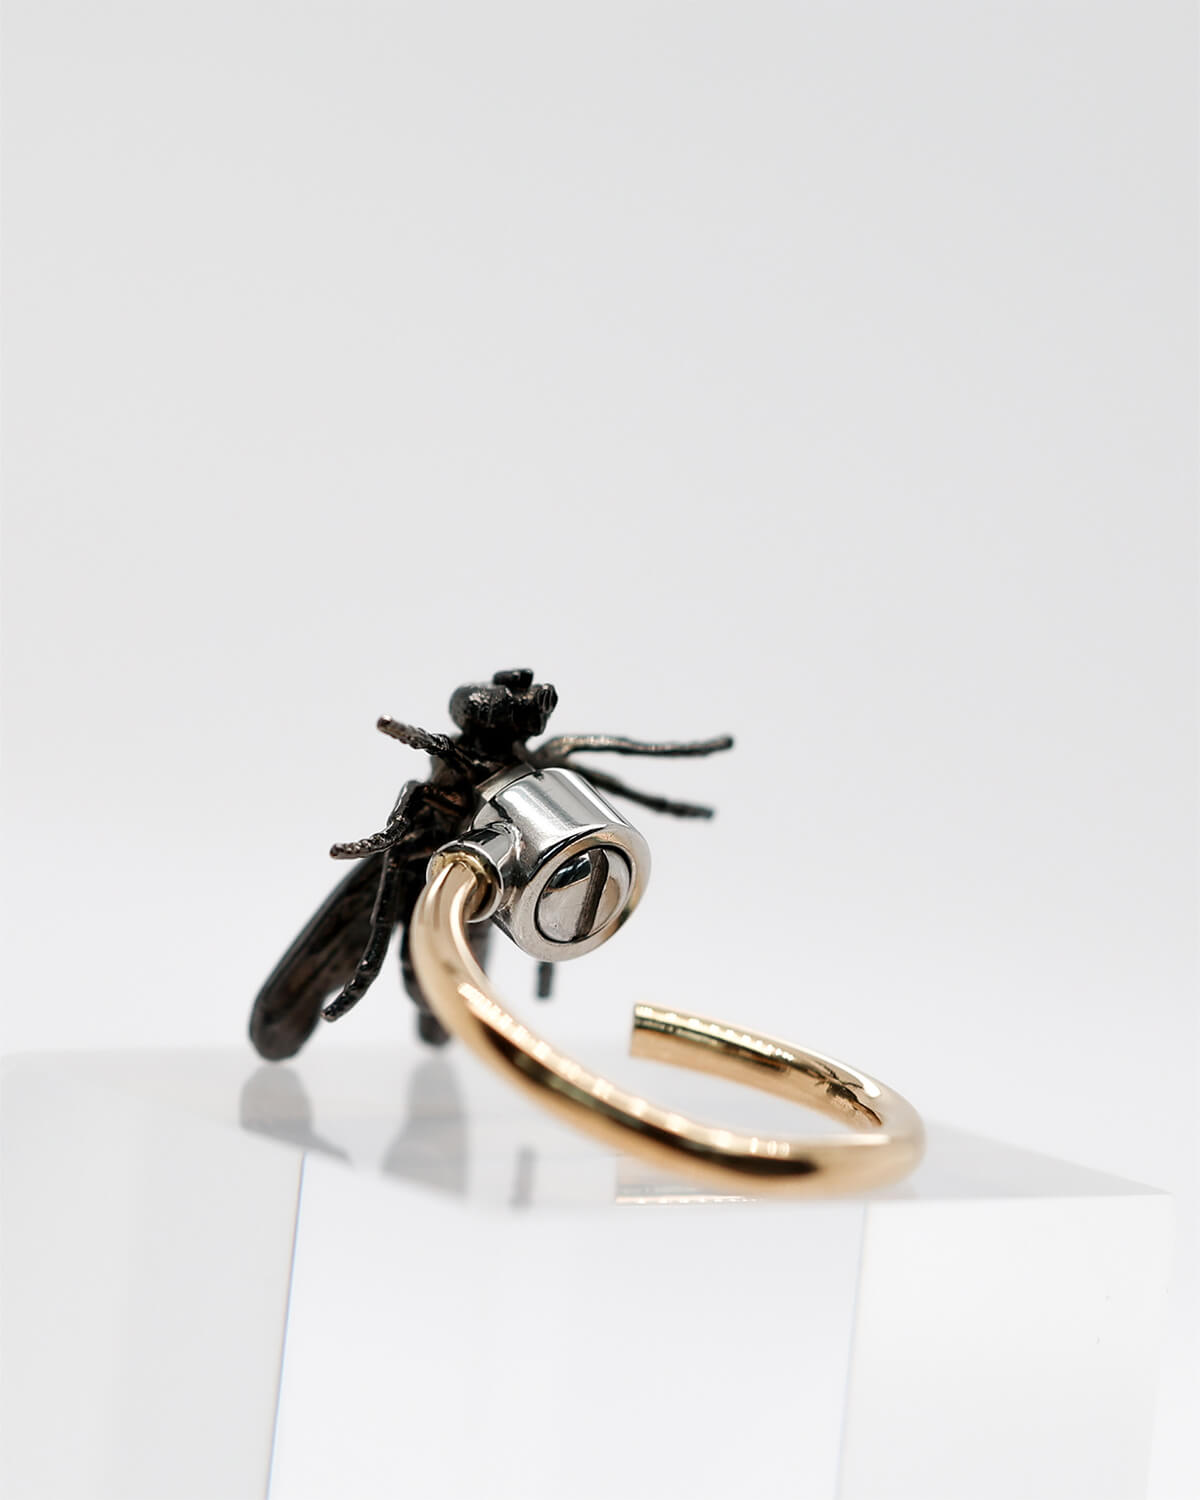 GOLD RING, INSECT COLLECTION